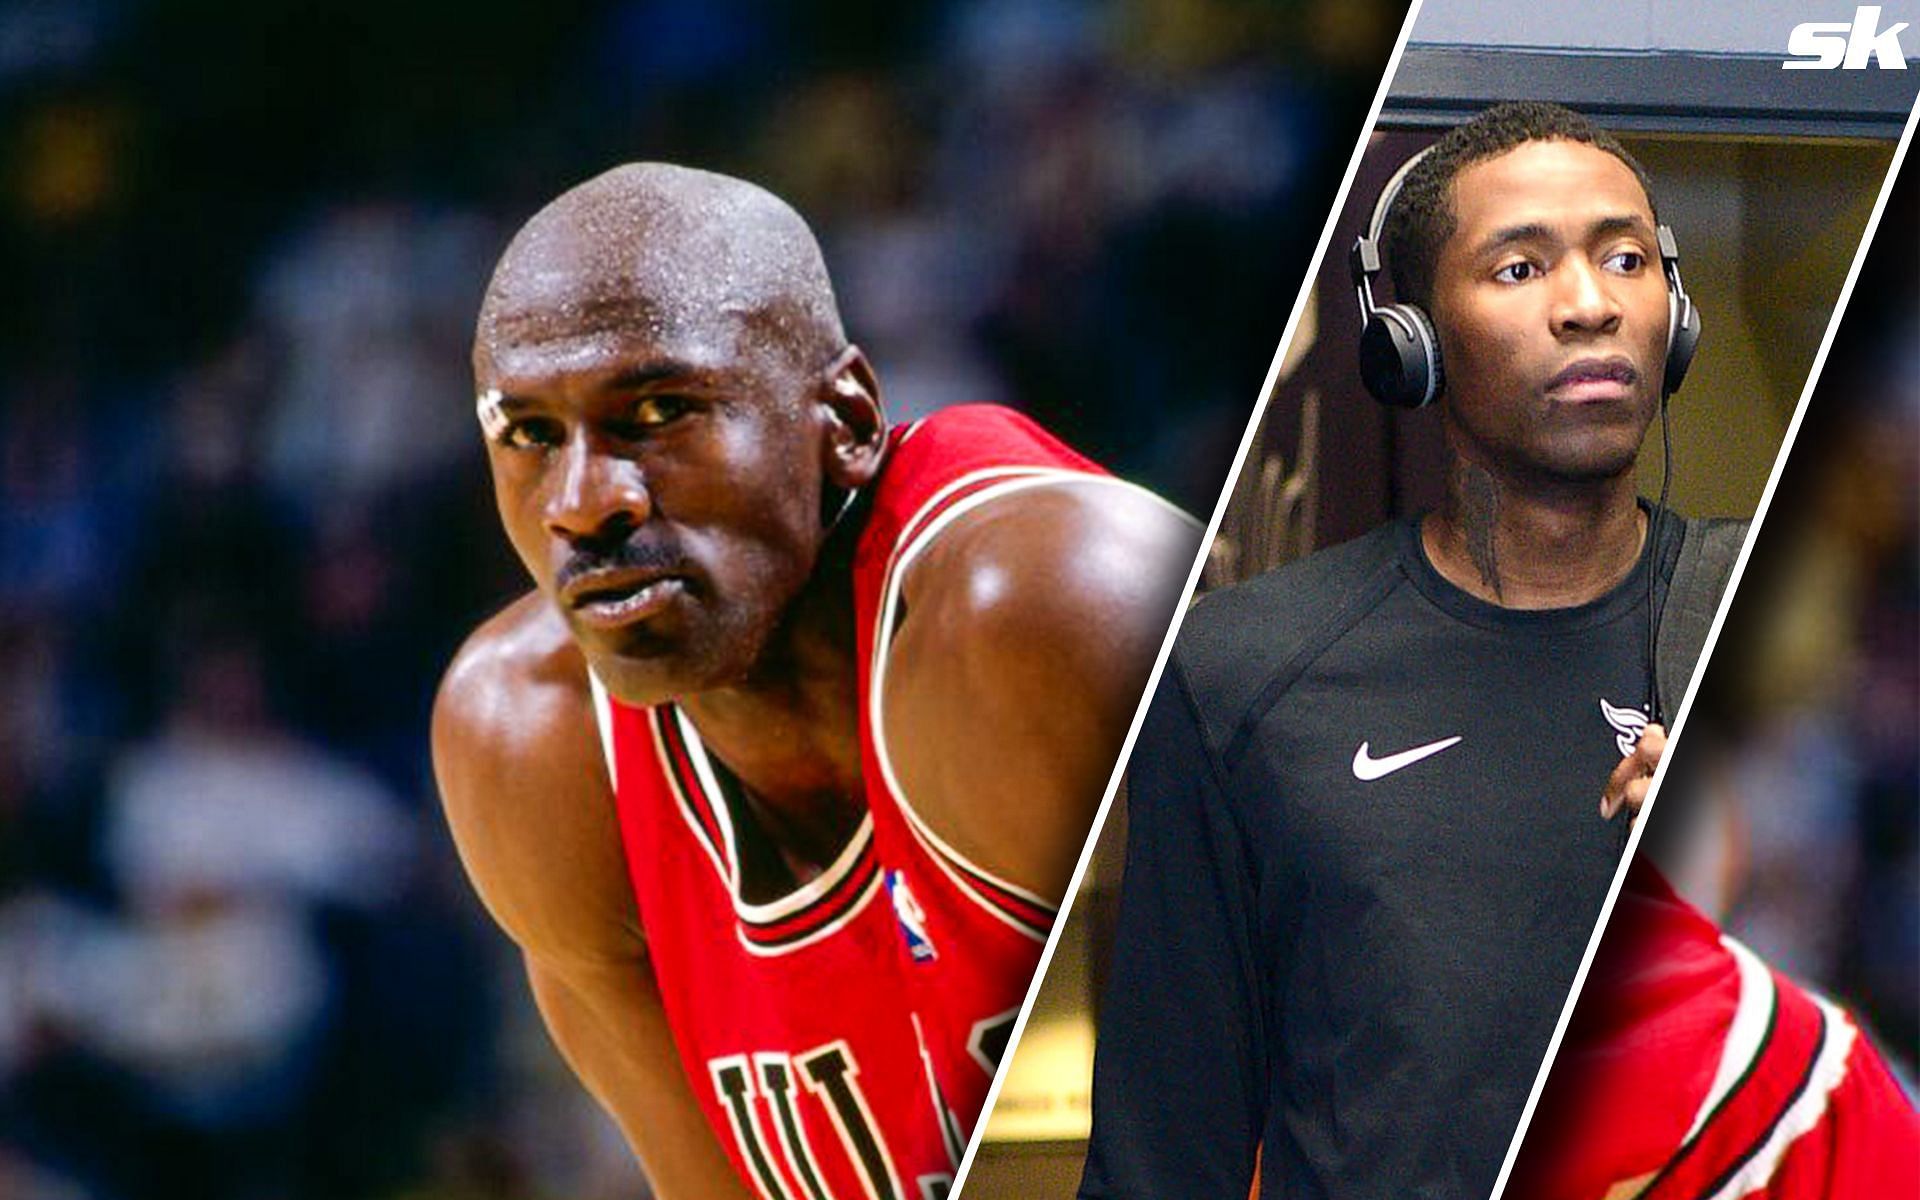 Jamal Crawford shared the story of meeting Michael Jordan for the first time.